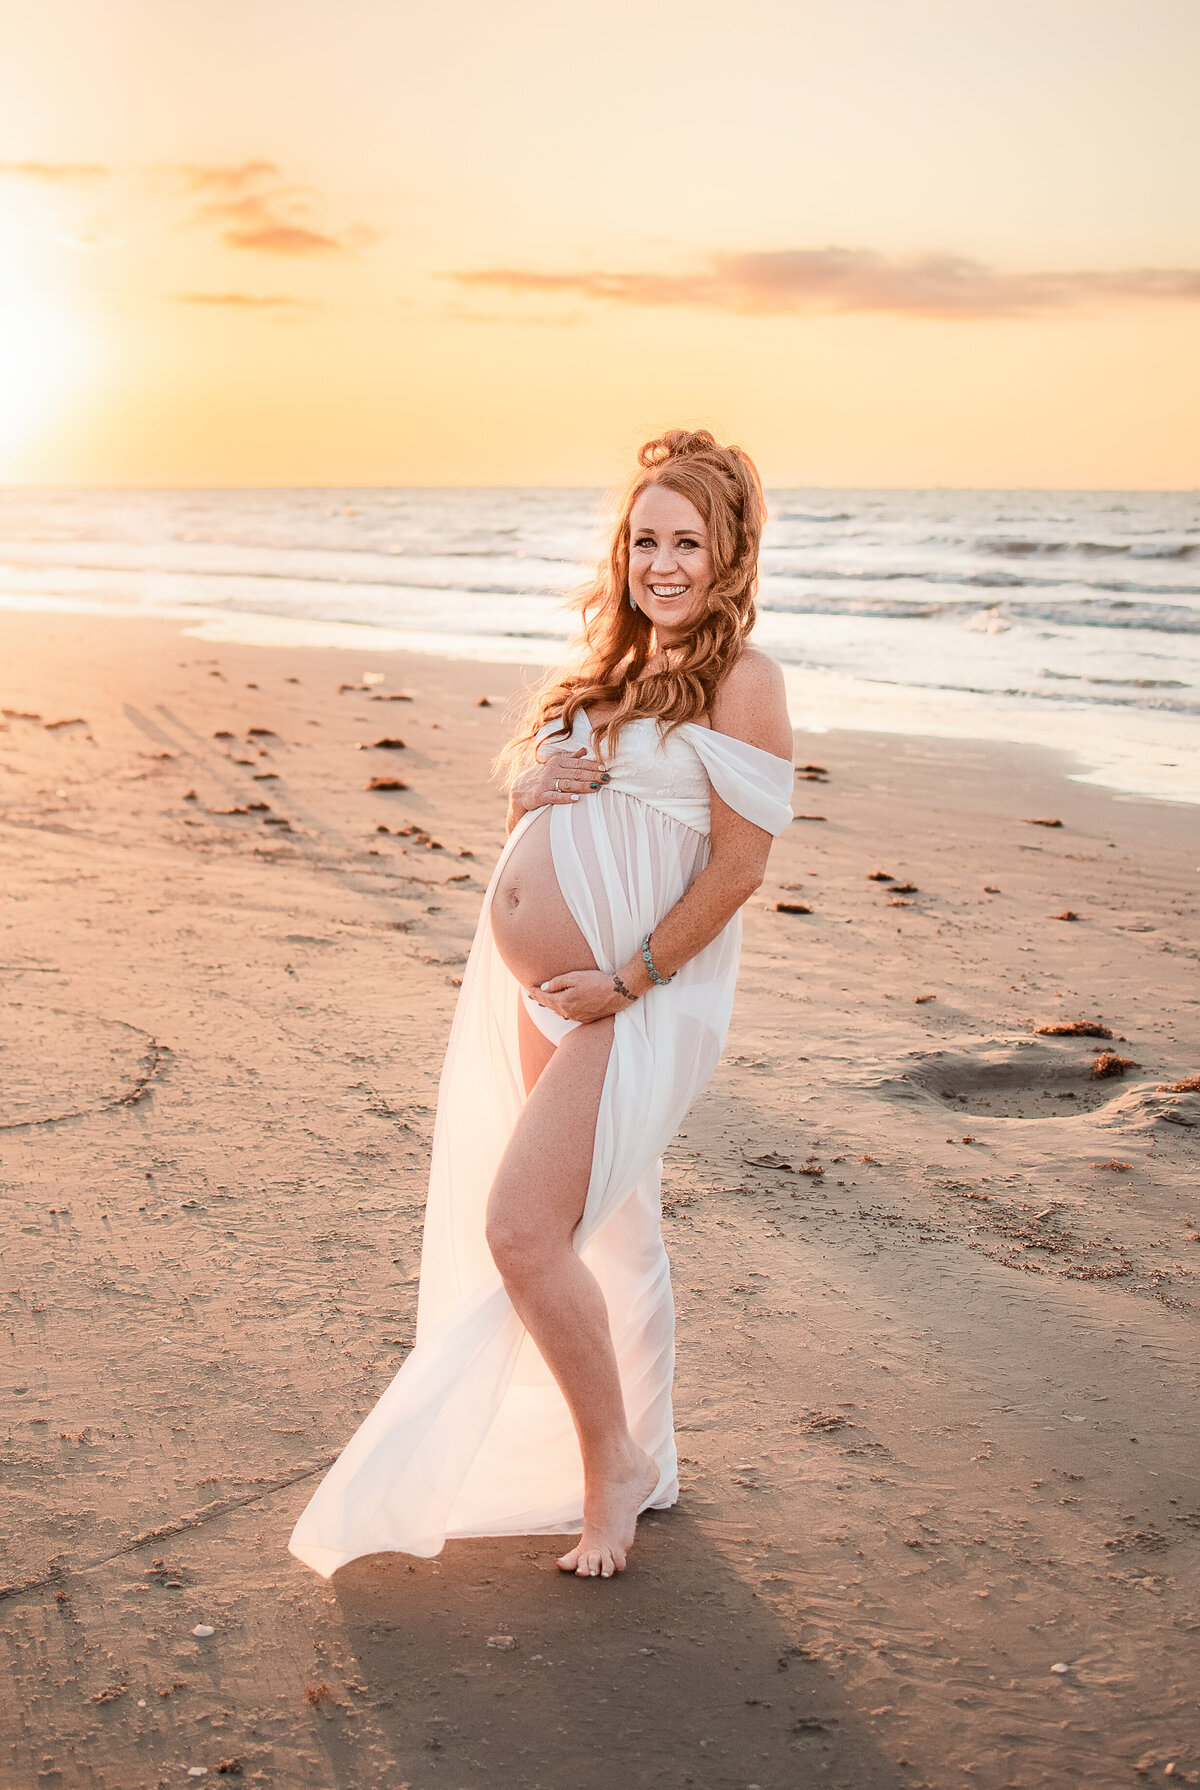 A pregnant mom wearing a white dress stands on a Galveston beach at sunrise.